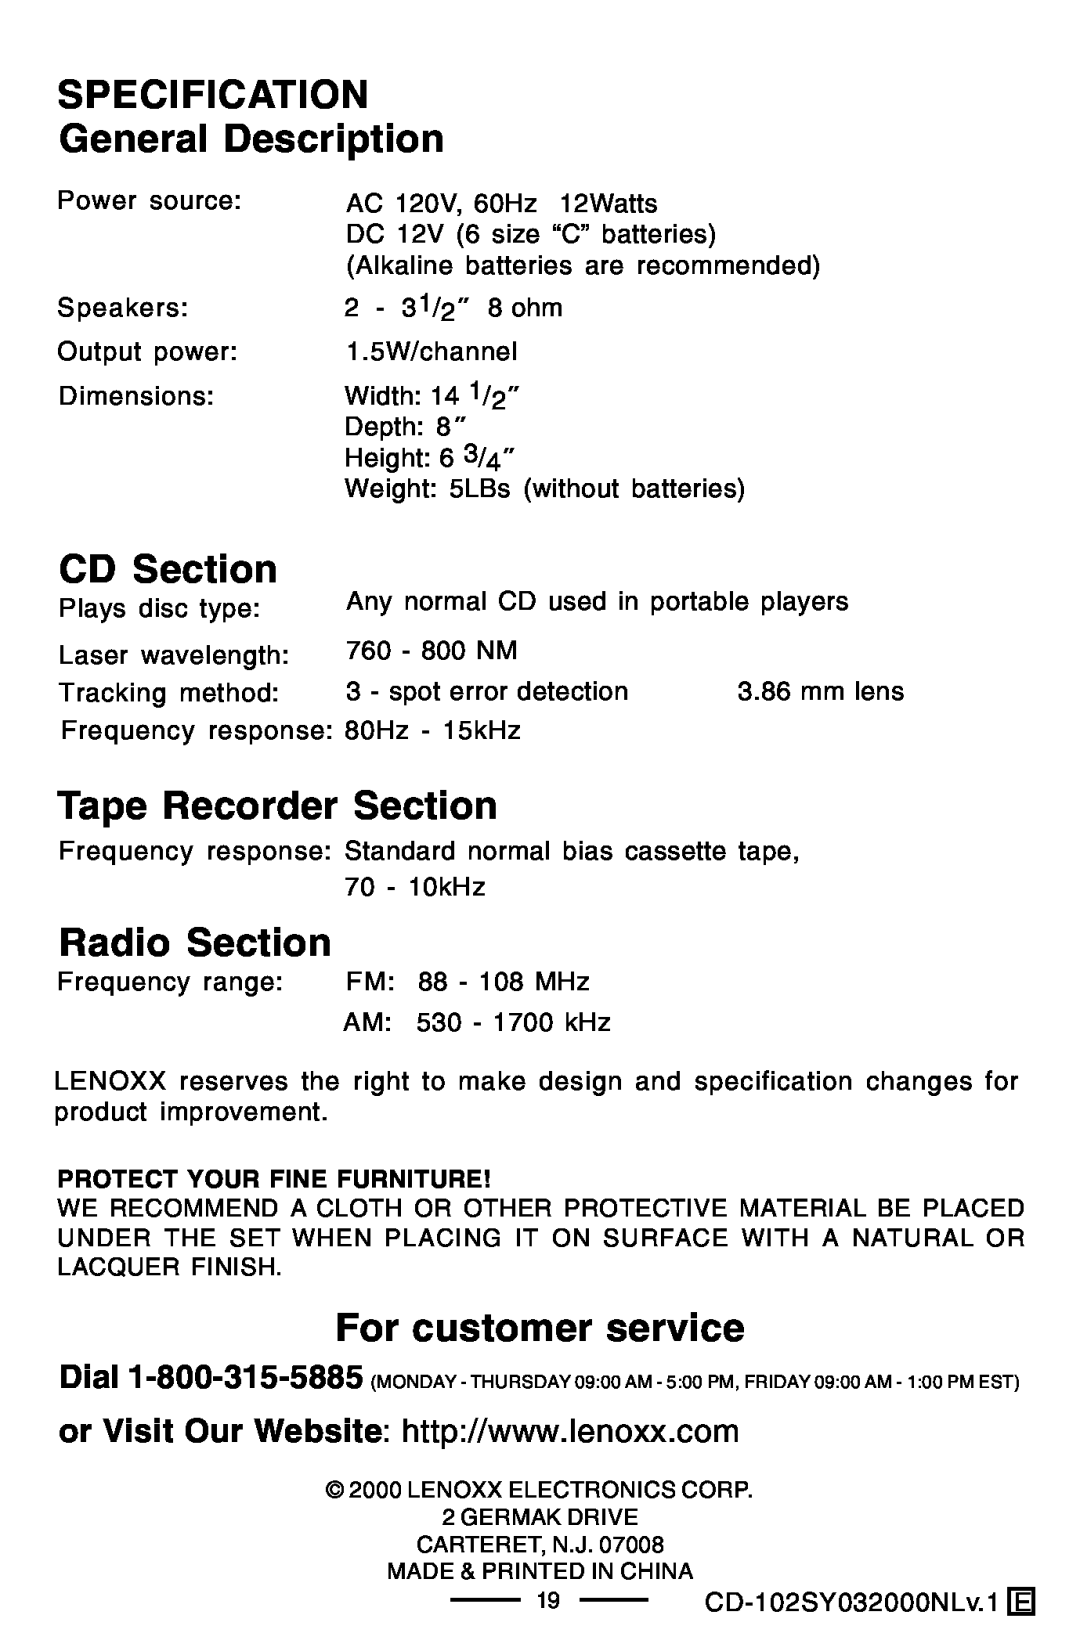 Lenoxx Electronics CD-102 SPECIFICATION General Description, CD Section, Tape Recorder Section, Radio Section 